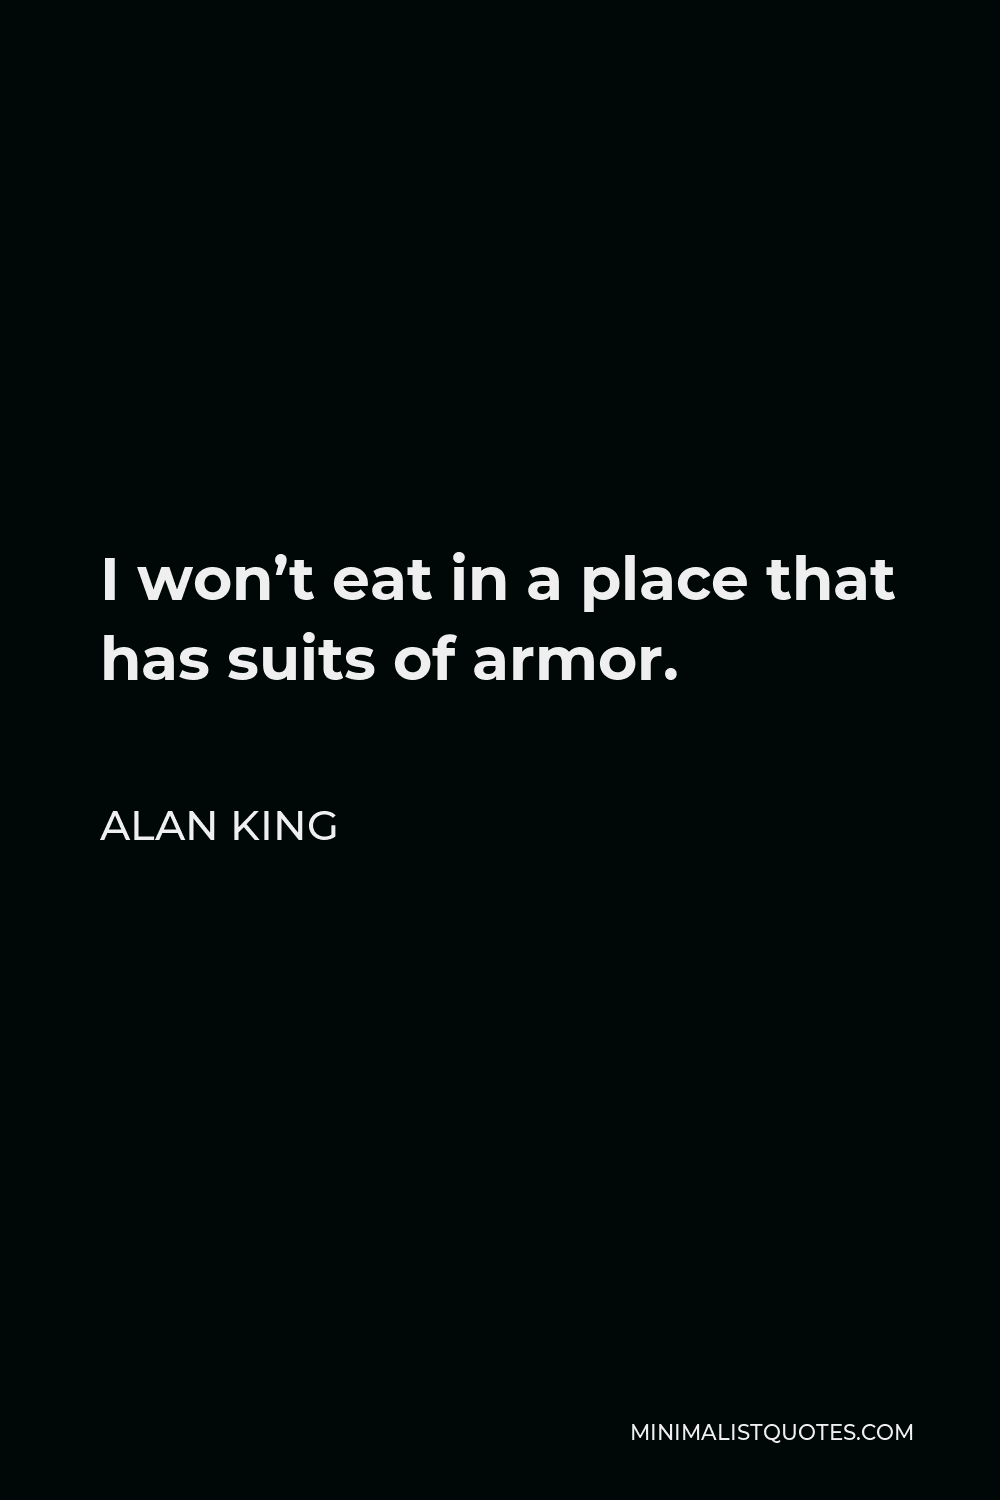 Alan King Quote - I won’t eat in a place that has suits of armor.